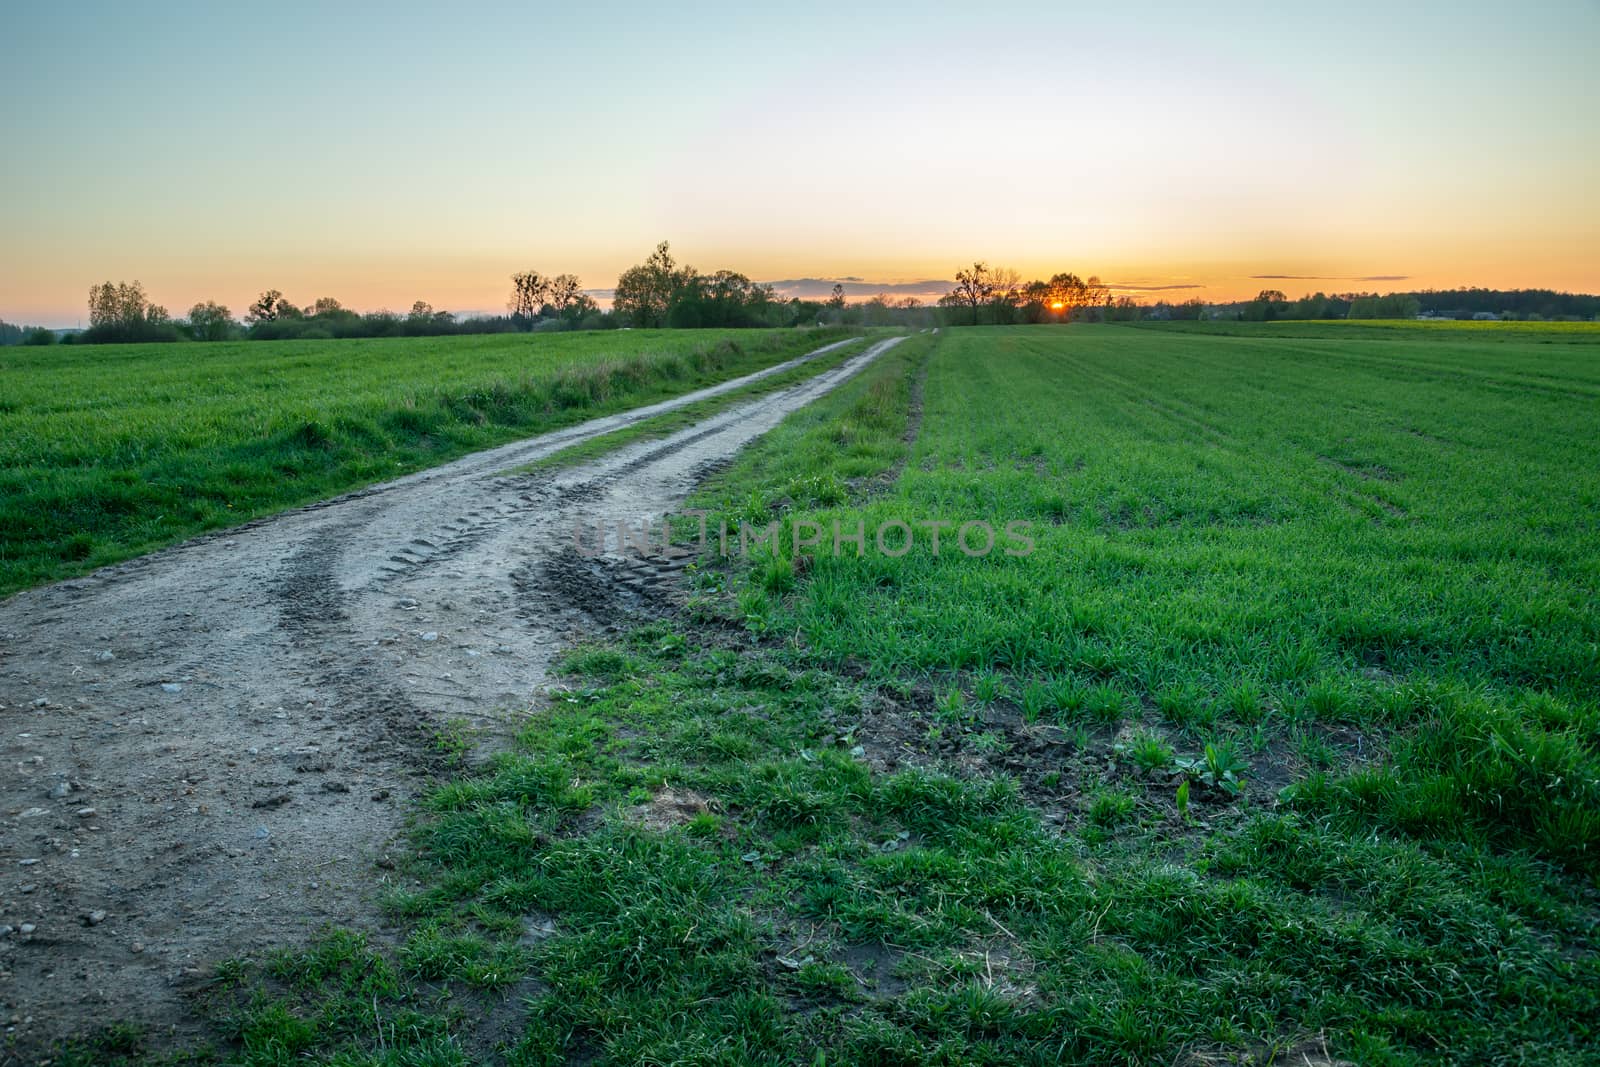 Exit onto a dirt road with green fields and sunset, evening spring view